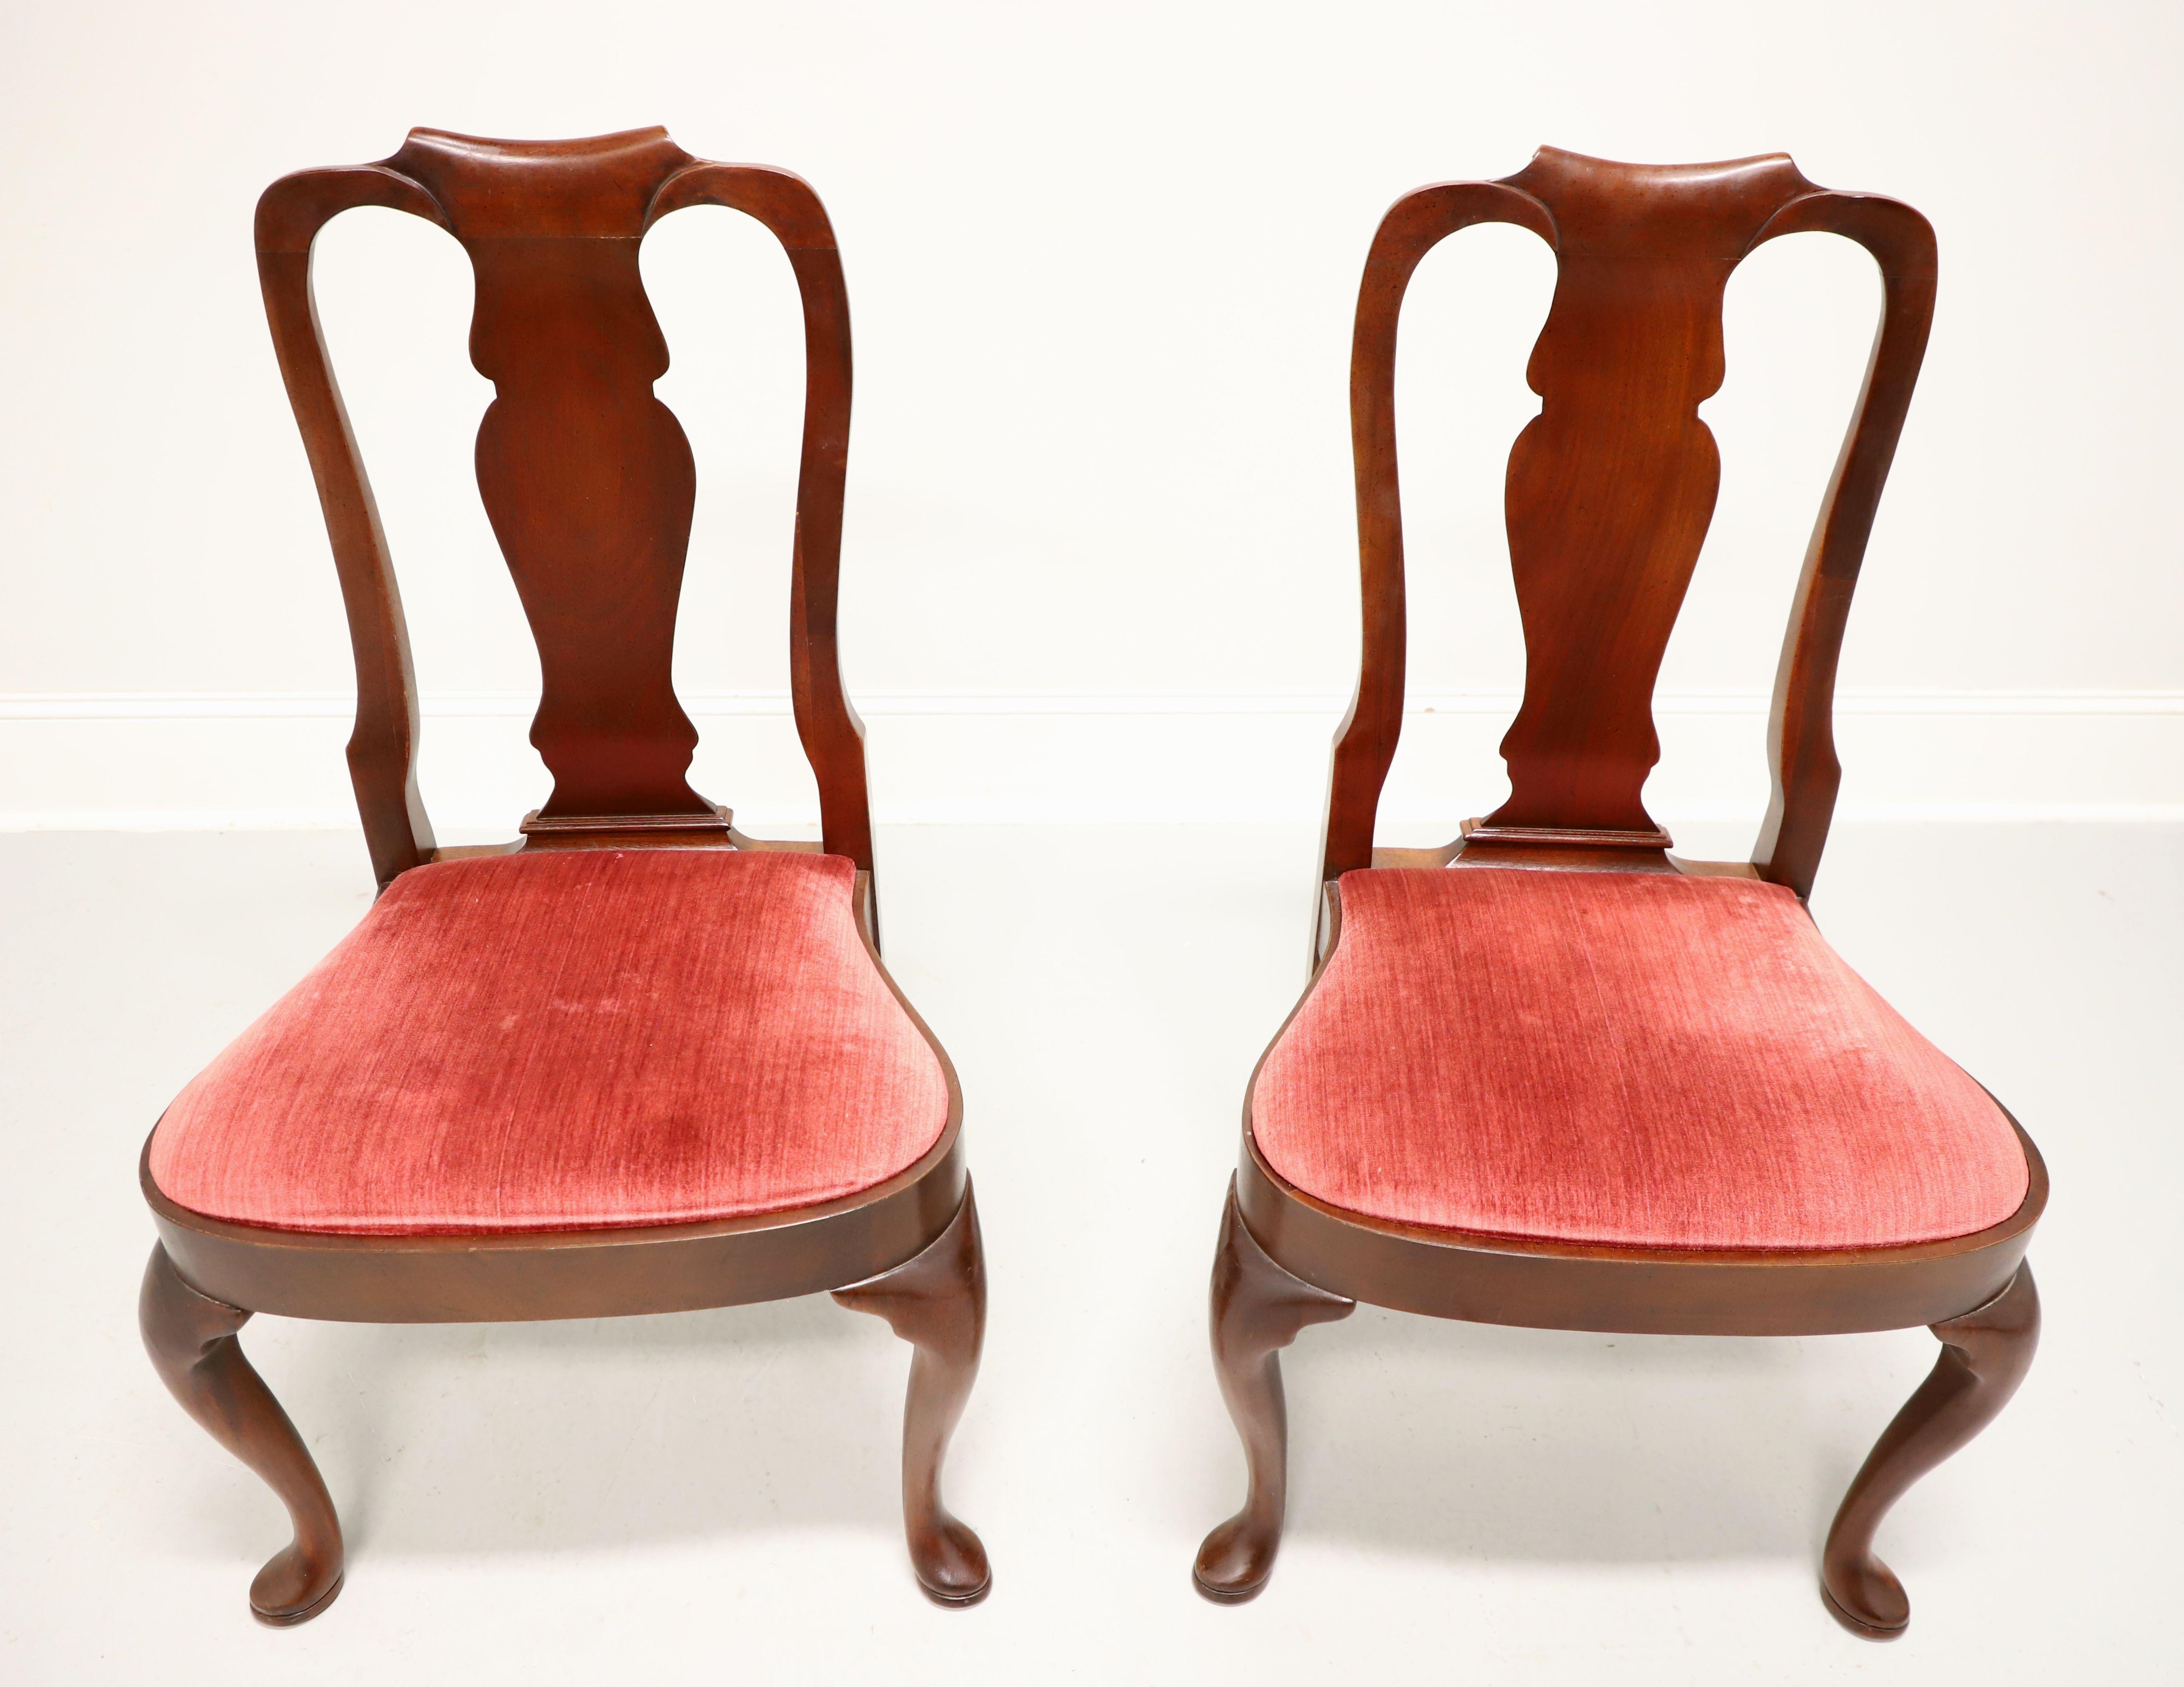 A pair of Queen Anne style dining side chairs by high-quality furniture maker Hickory Chair. Mahogany with solid carved back rest, a rose red color velvet fabric upholstered seat, rounded apron, cabriole legs and pad feet. Made in North Carolina,